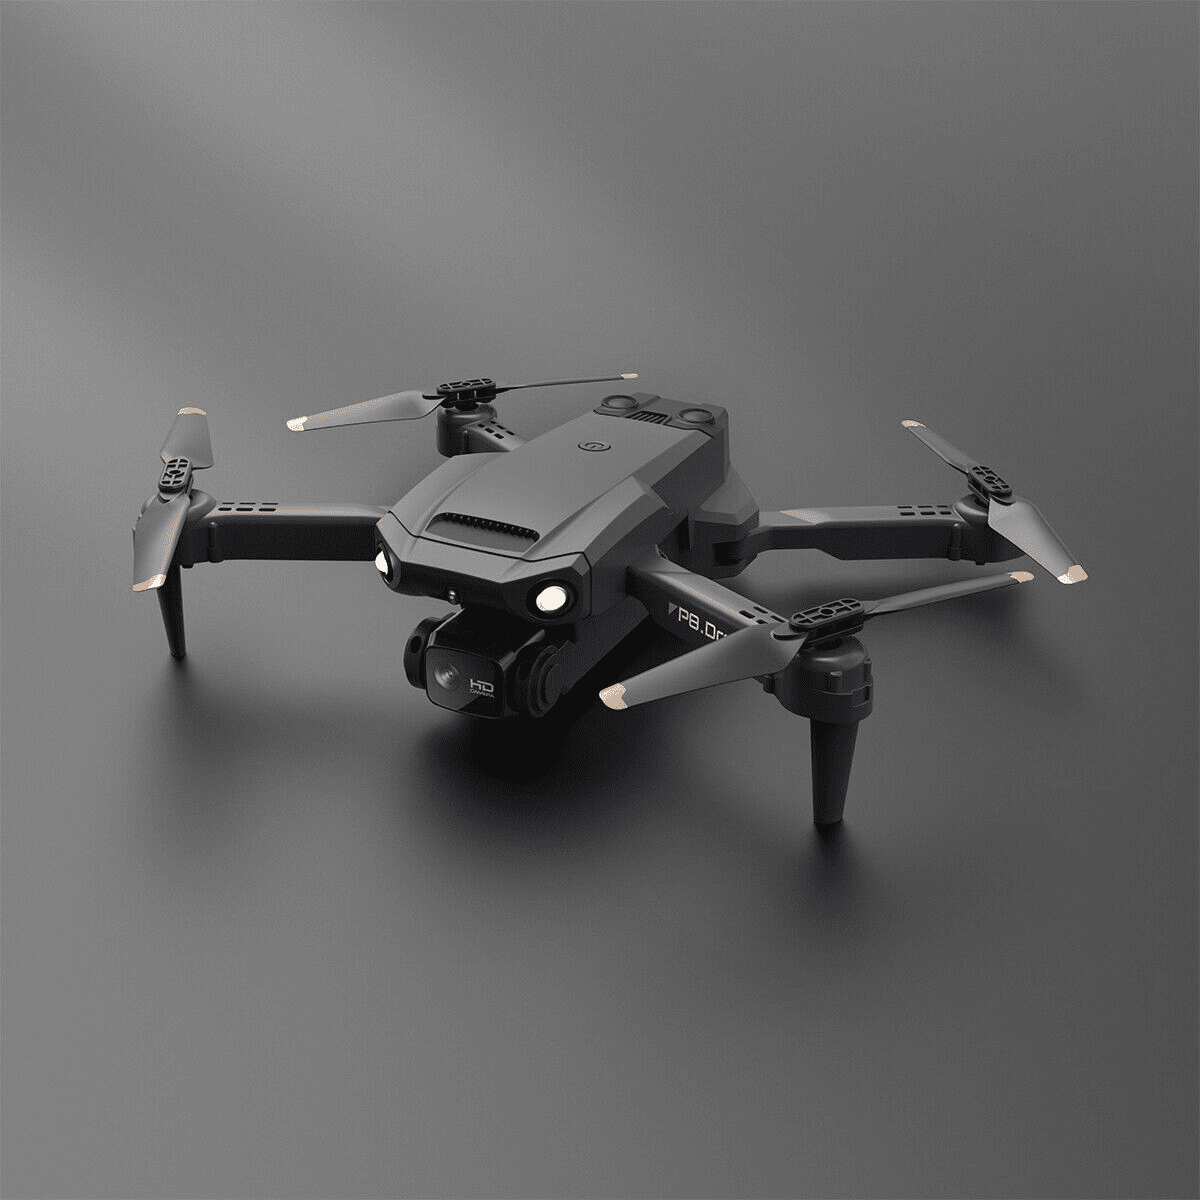 5G 4K Drone with UHD Camera 3x Batteries Kit